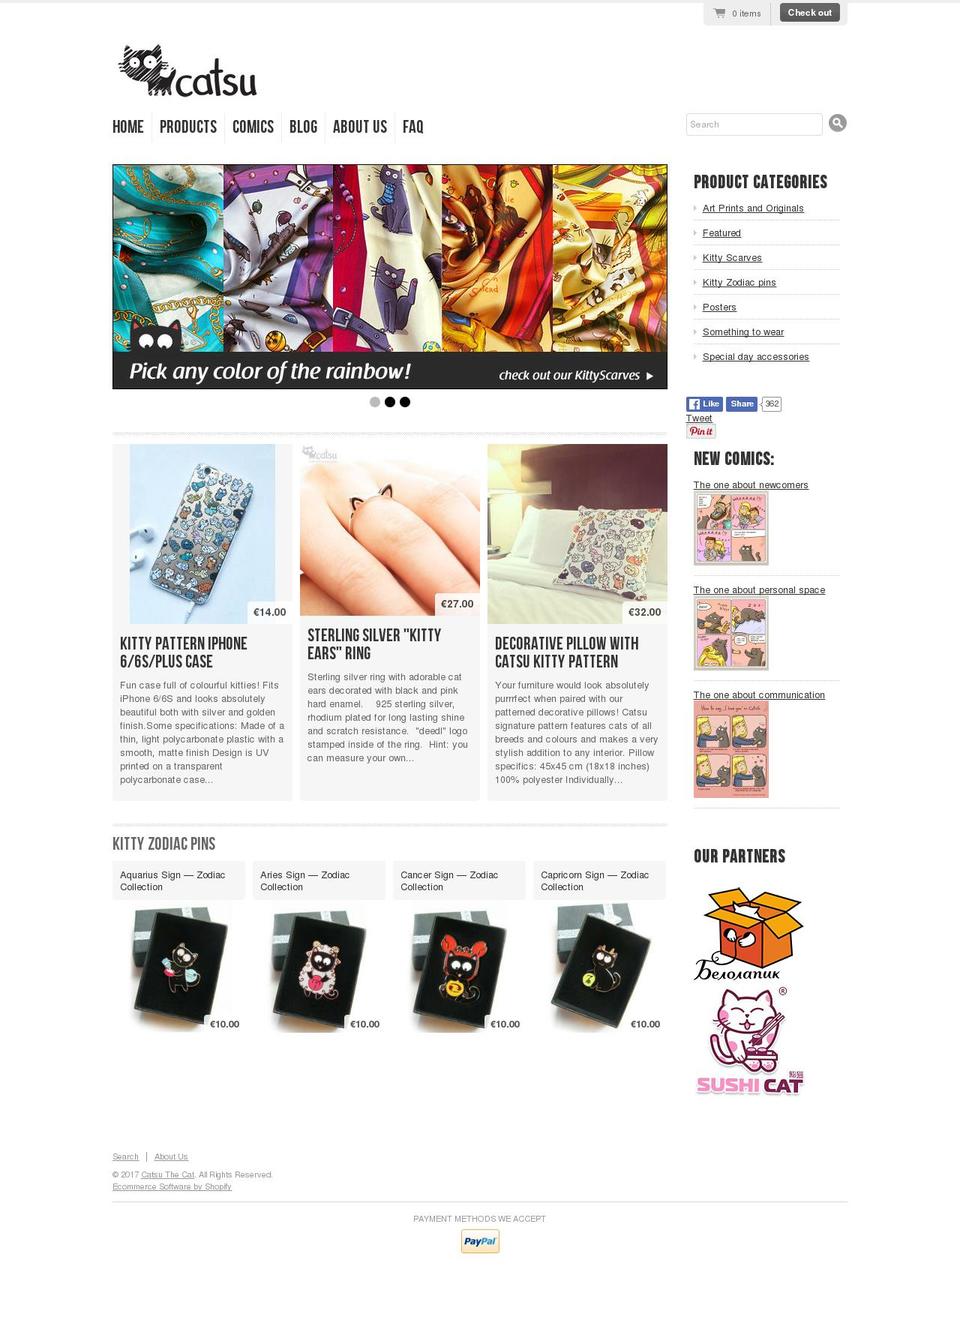 Radiance Shopify theme site example catsuthecat.com